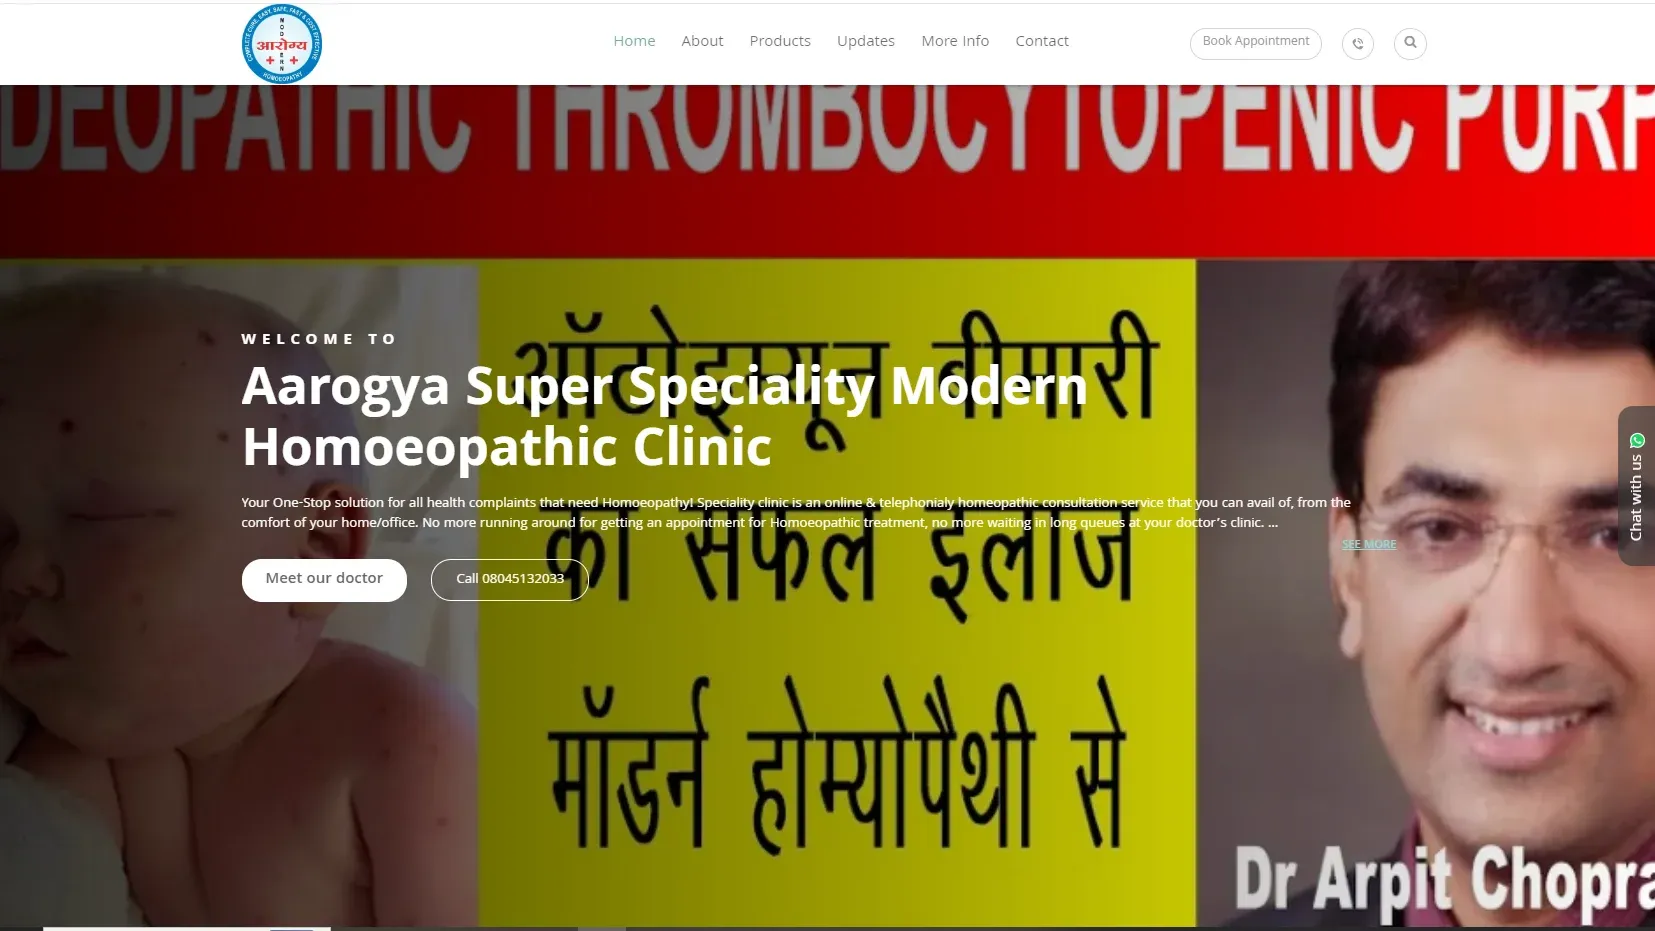 Aarogya Super Speciality Modern Homoeopathic Clinic, Indore